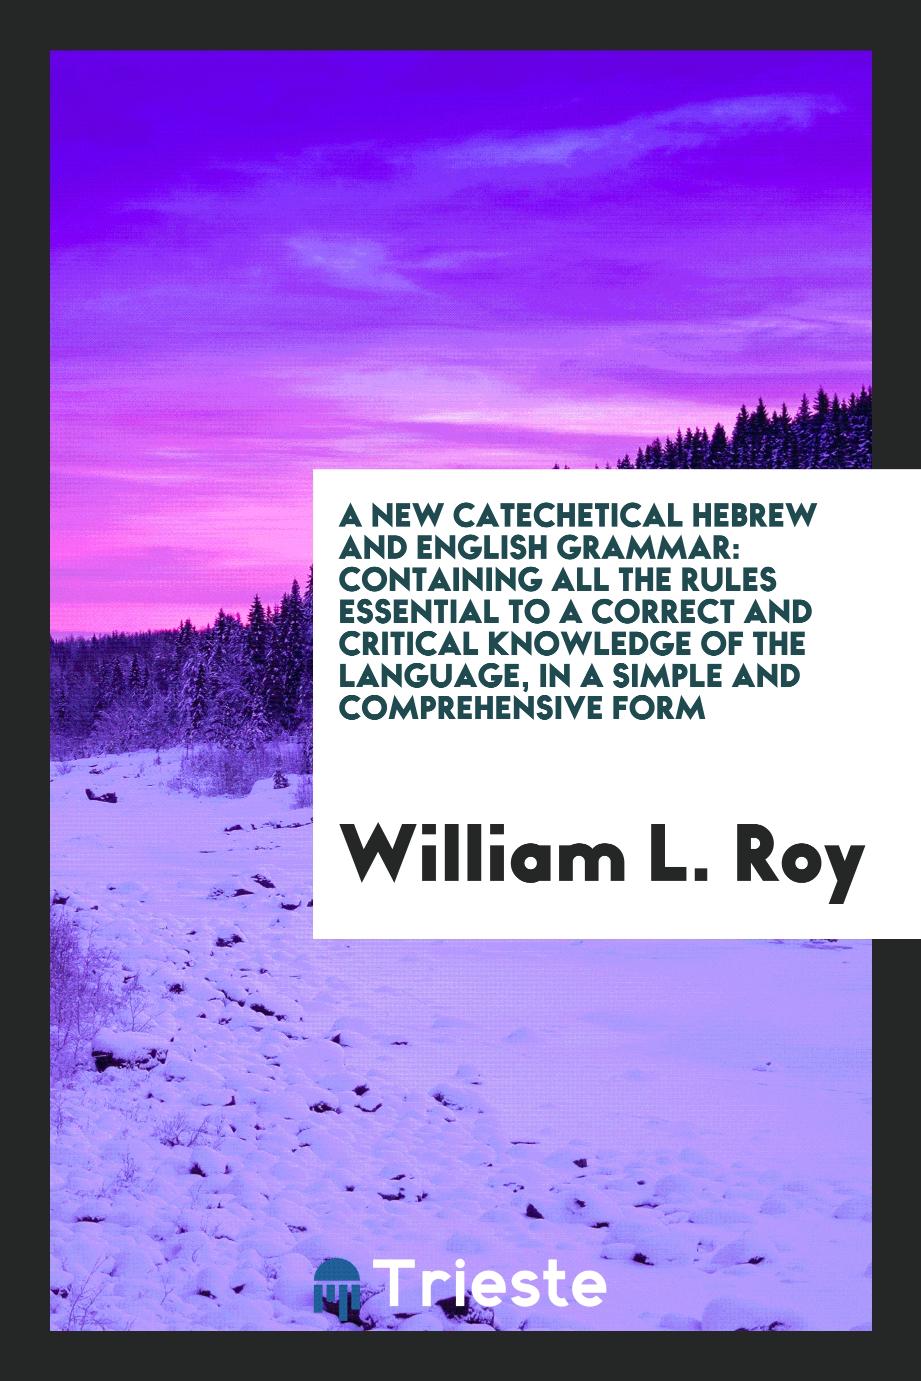 A New Catechetical Hebrew and English Grammar: Containing All the Rules Essential to a Correct and Critical Knowledge of the Language, in a Simple and Comprehensive Form